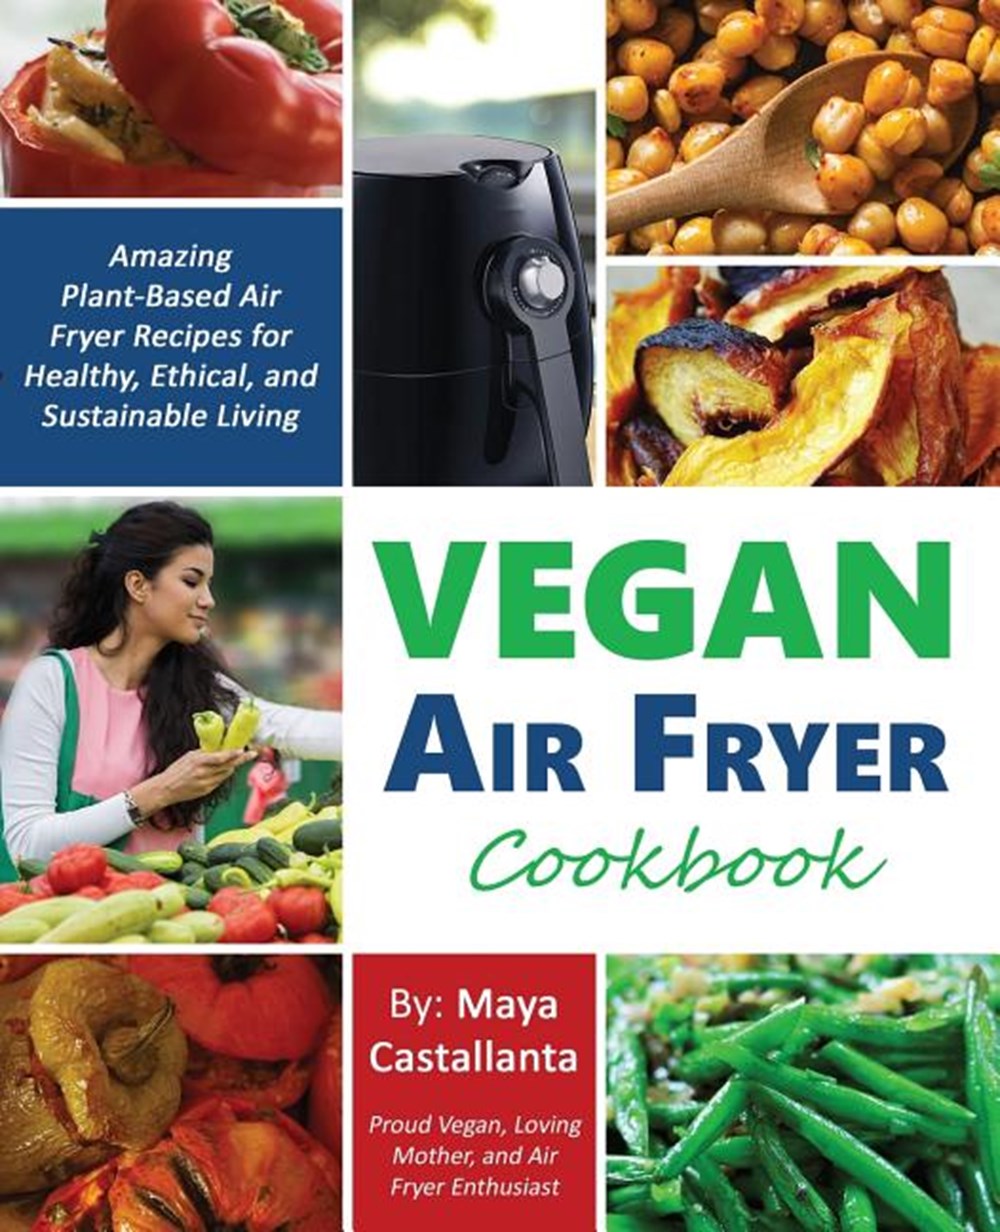 Vegan Air Fryer Cookbook: Amazing Plant-Based Air Fryer Recipes for Healthy, Ethical, and Sustainabl